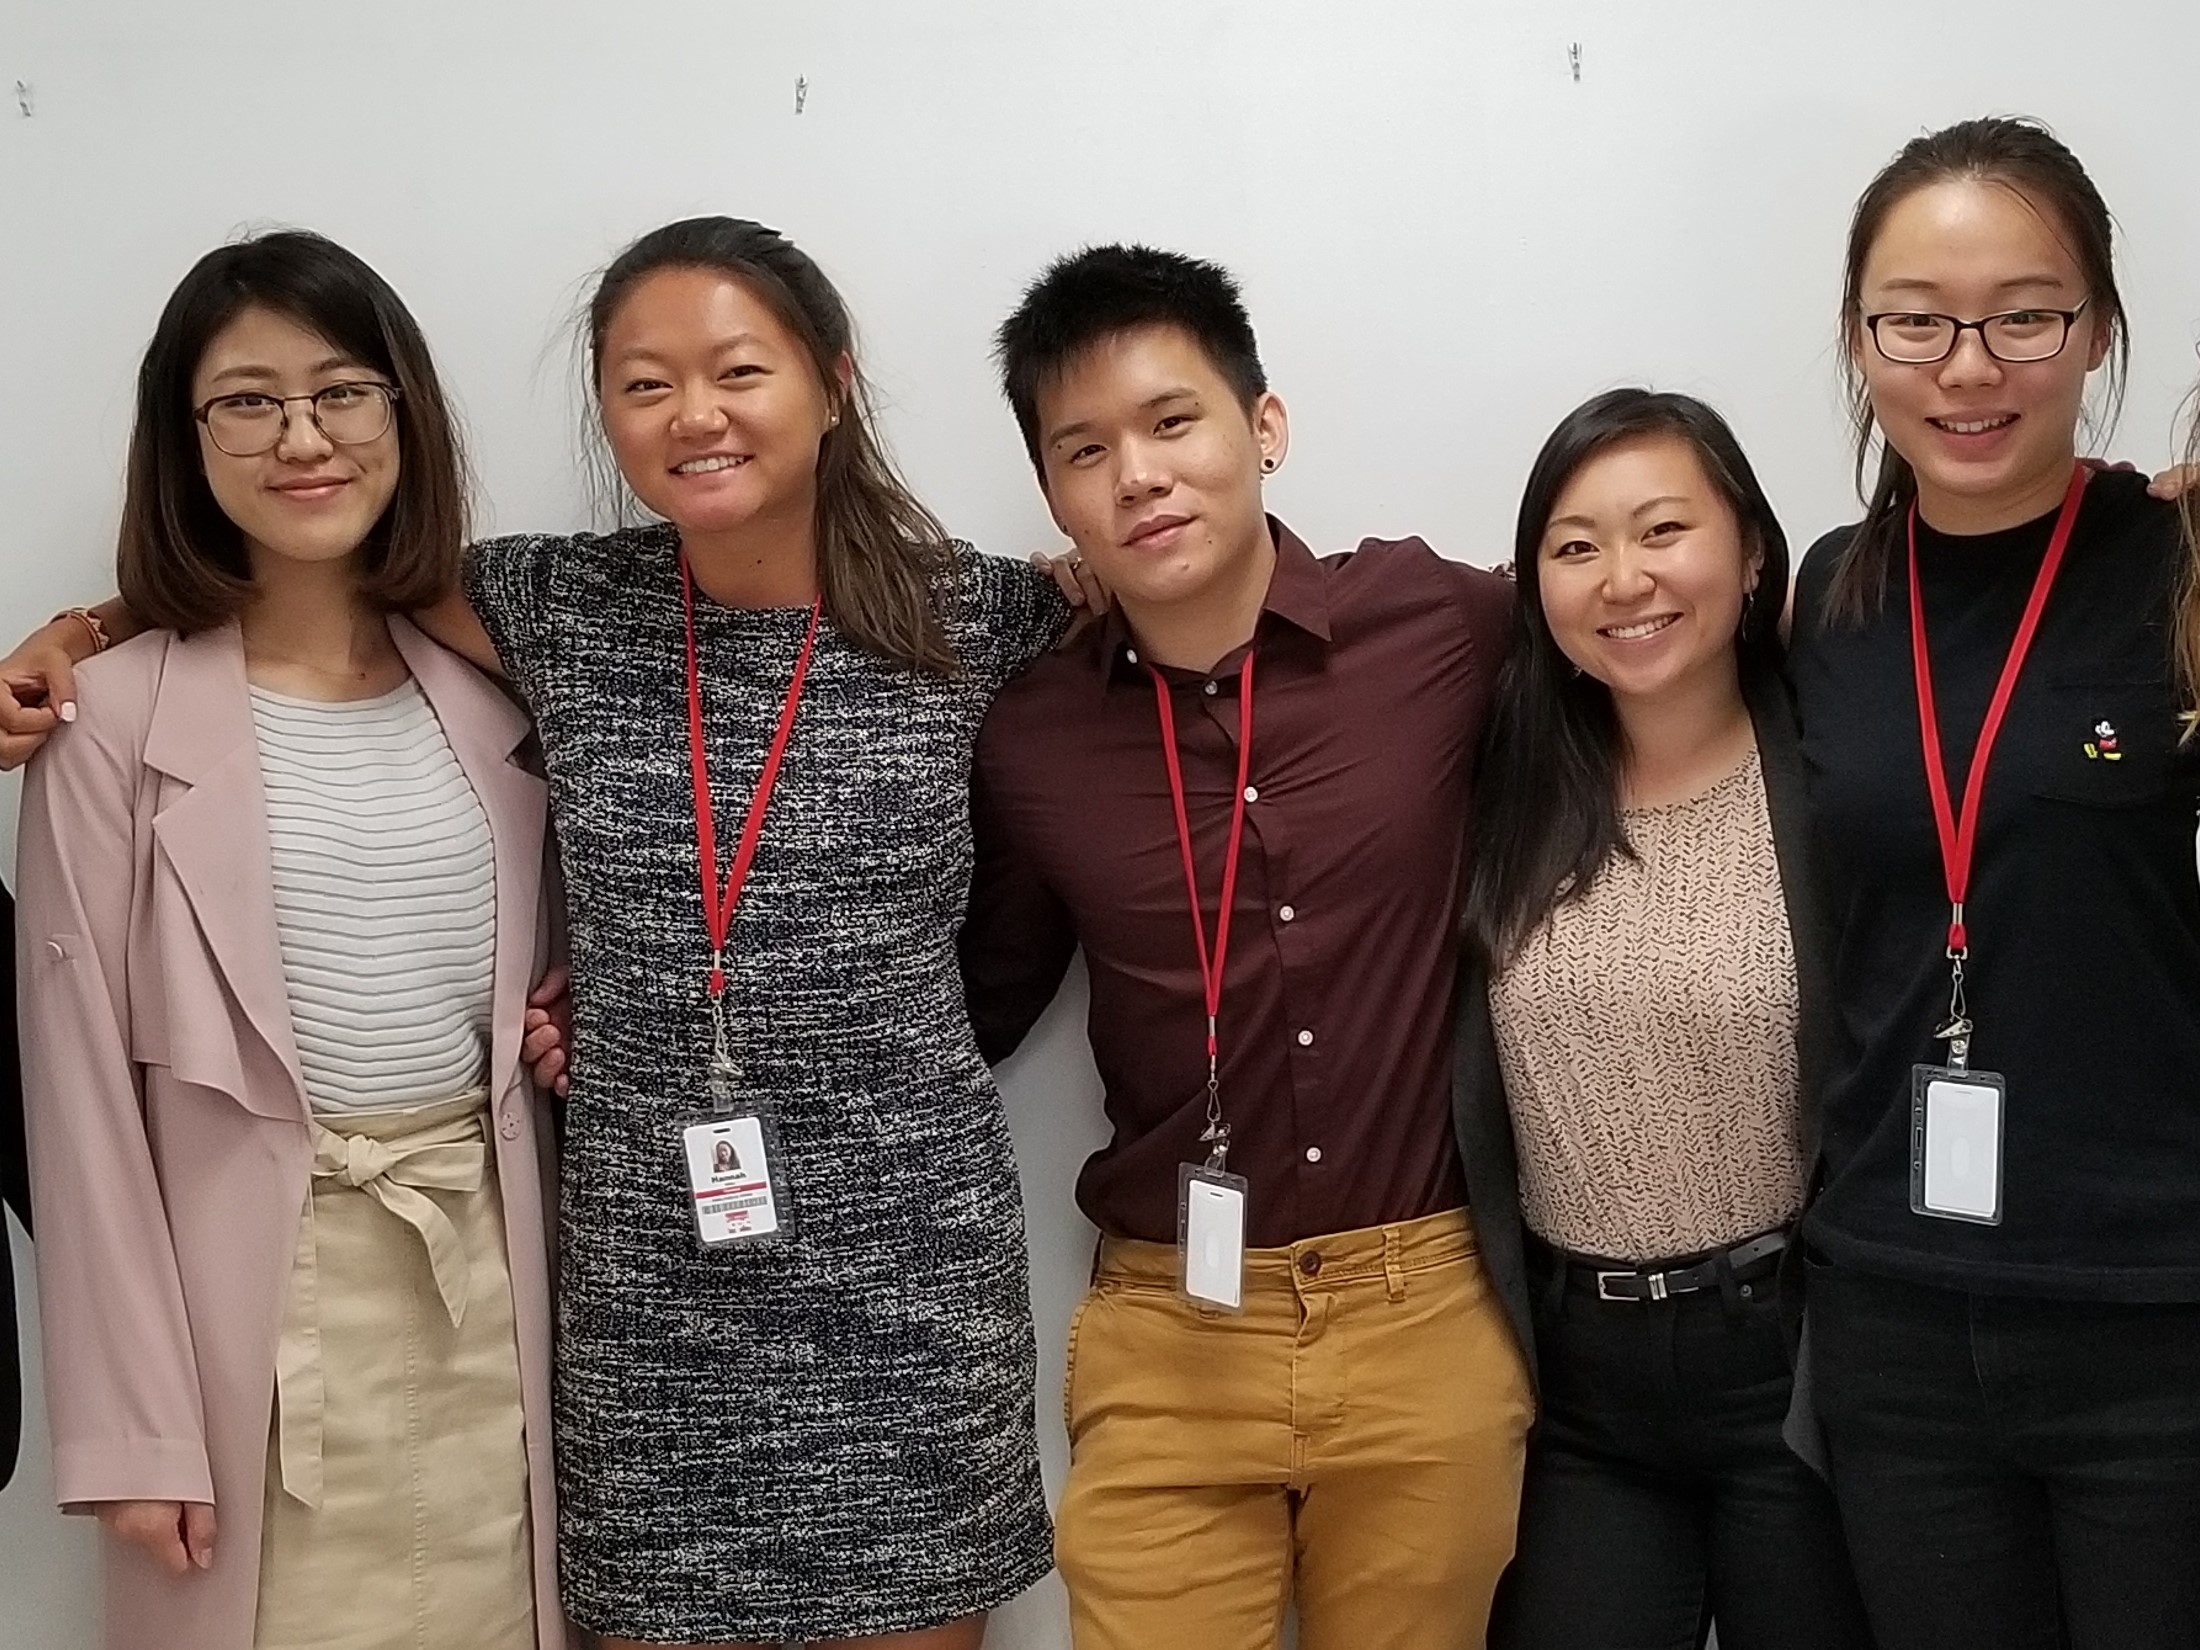 Summer Interns Group photo: Left to right:  Vicky Zhong, Hannah Stiles, Welton Huang, Stephanie Chan, & Annie Chen